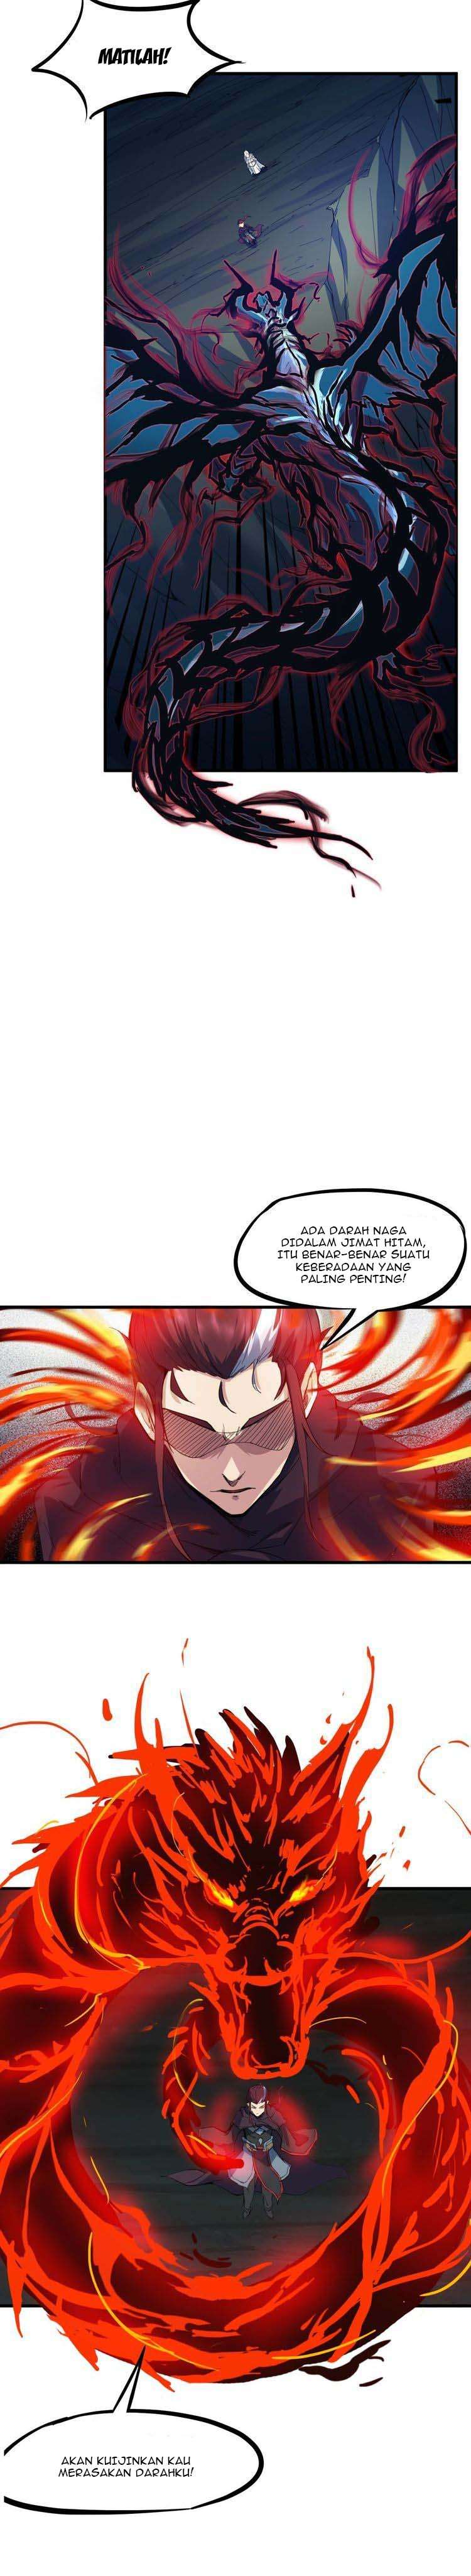 Dragon’s Blood Vessels Chapter 53 12